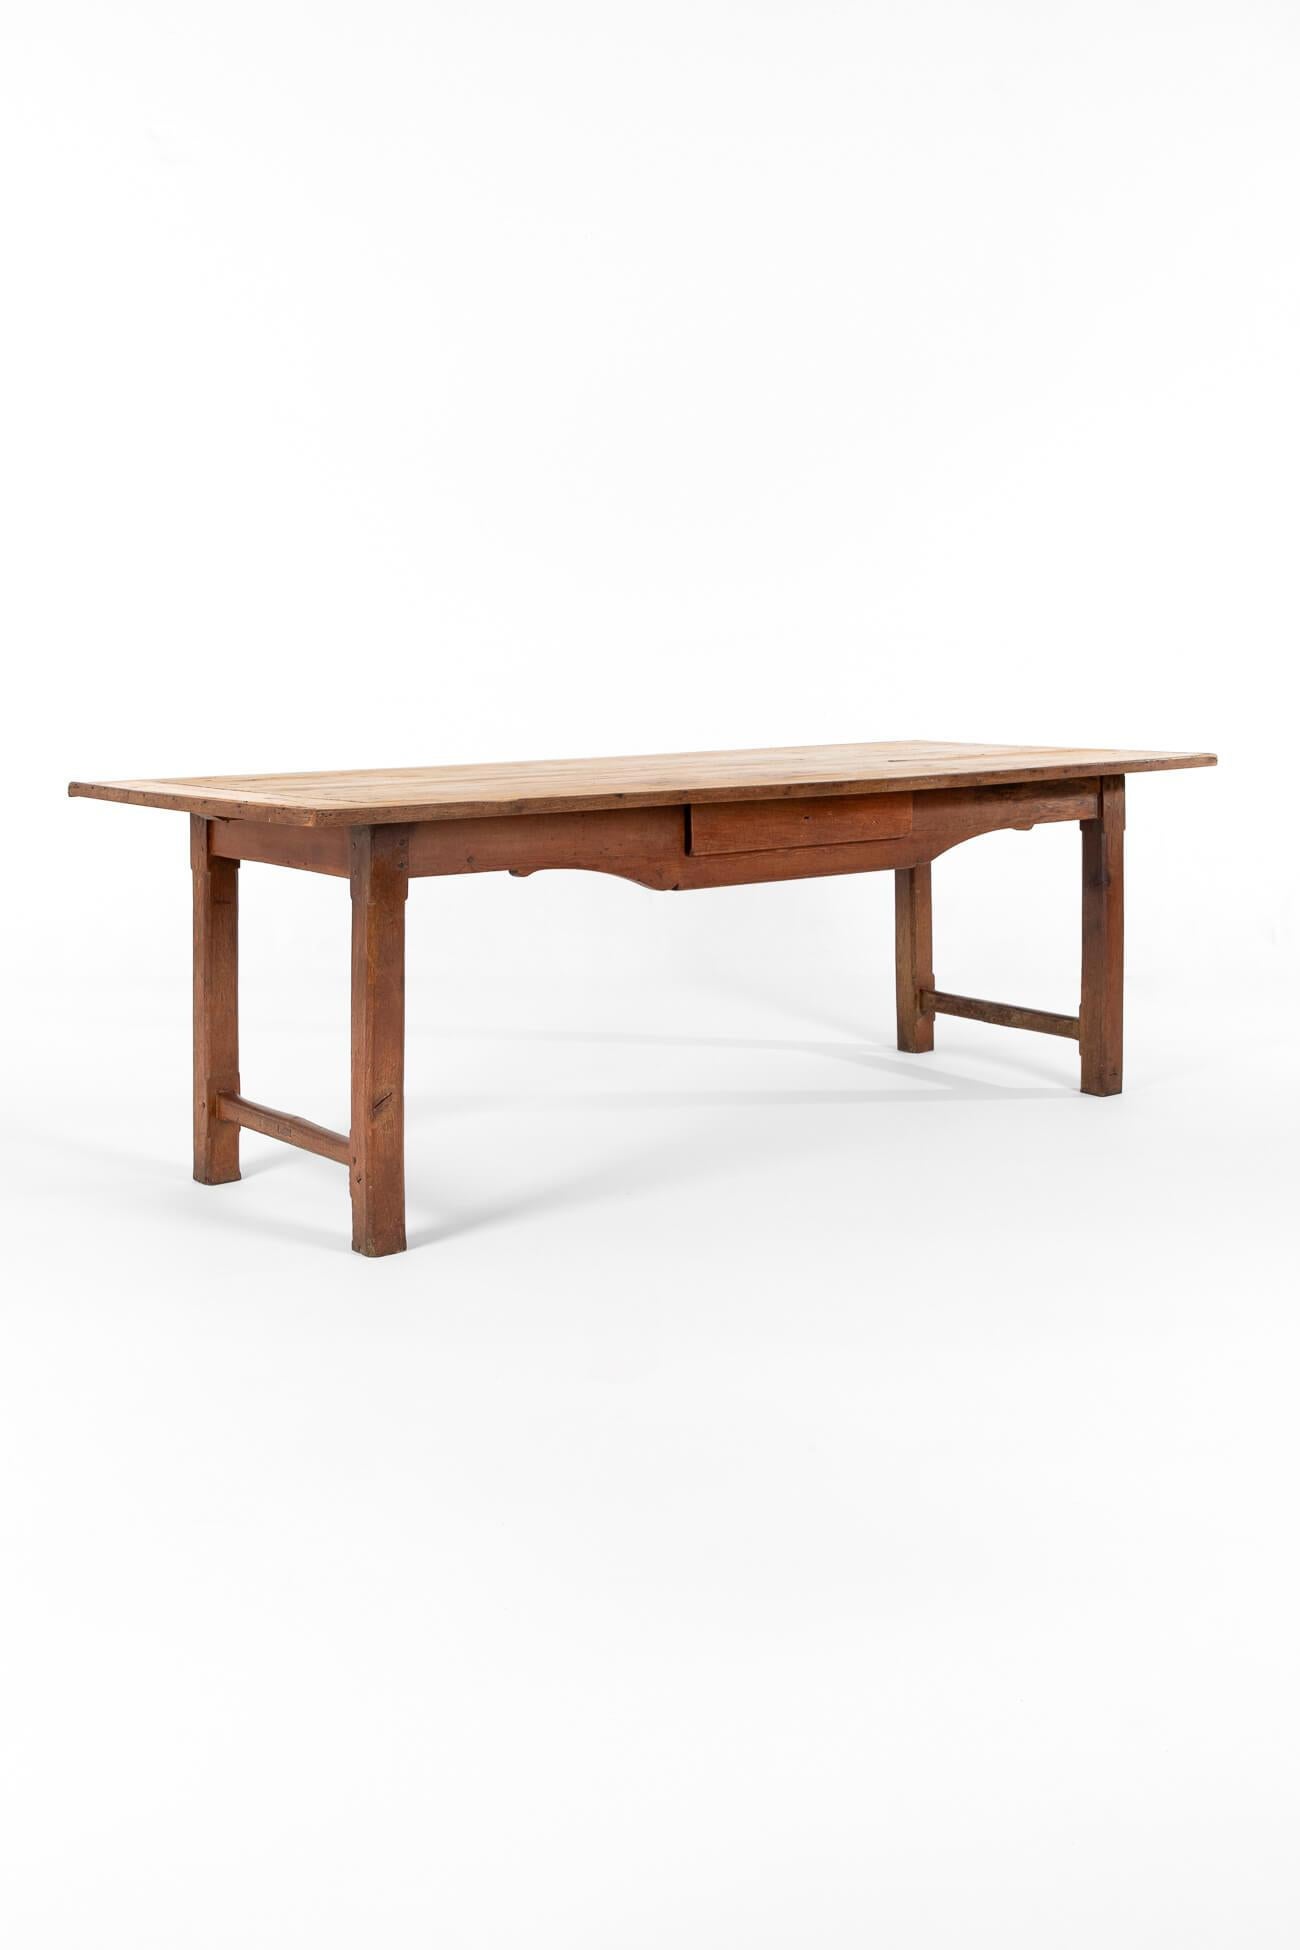 A large provincial French farmhouse table with an oak base and pine top.

The generous top is beautifully weathered with an open grain and a rich patina.

Four carved block legs with cross stretchers, peg and tenon joints,  a shapely carved apron